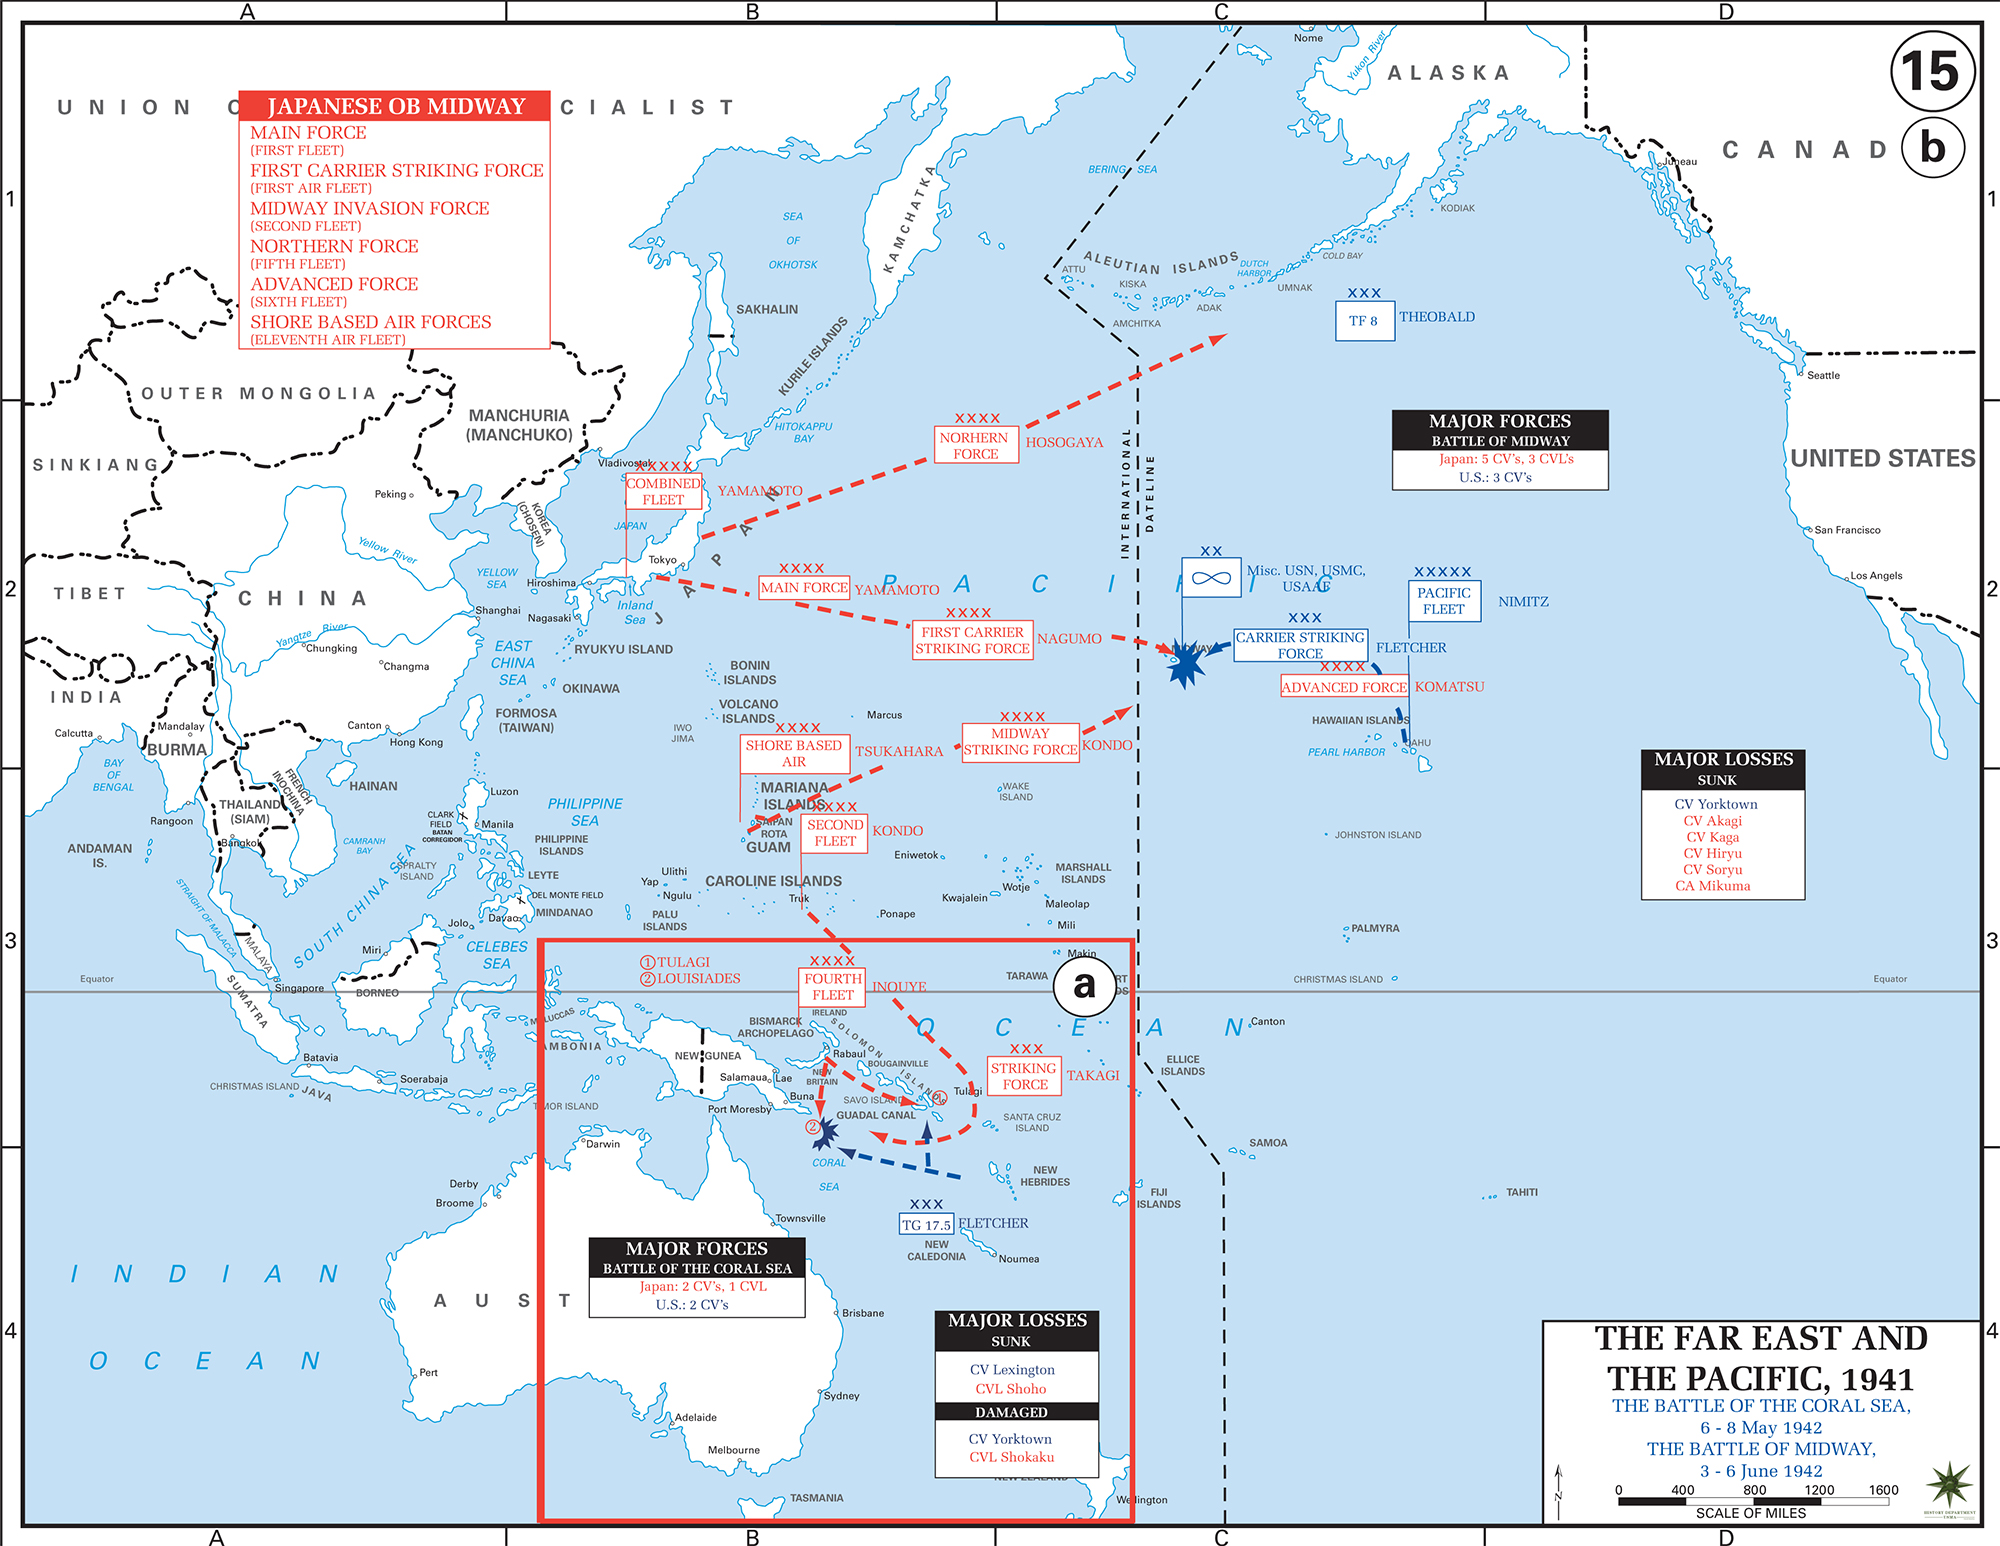 An Analysis of the Battle of Midway in the Pacific